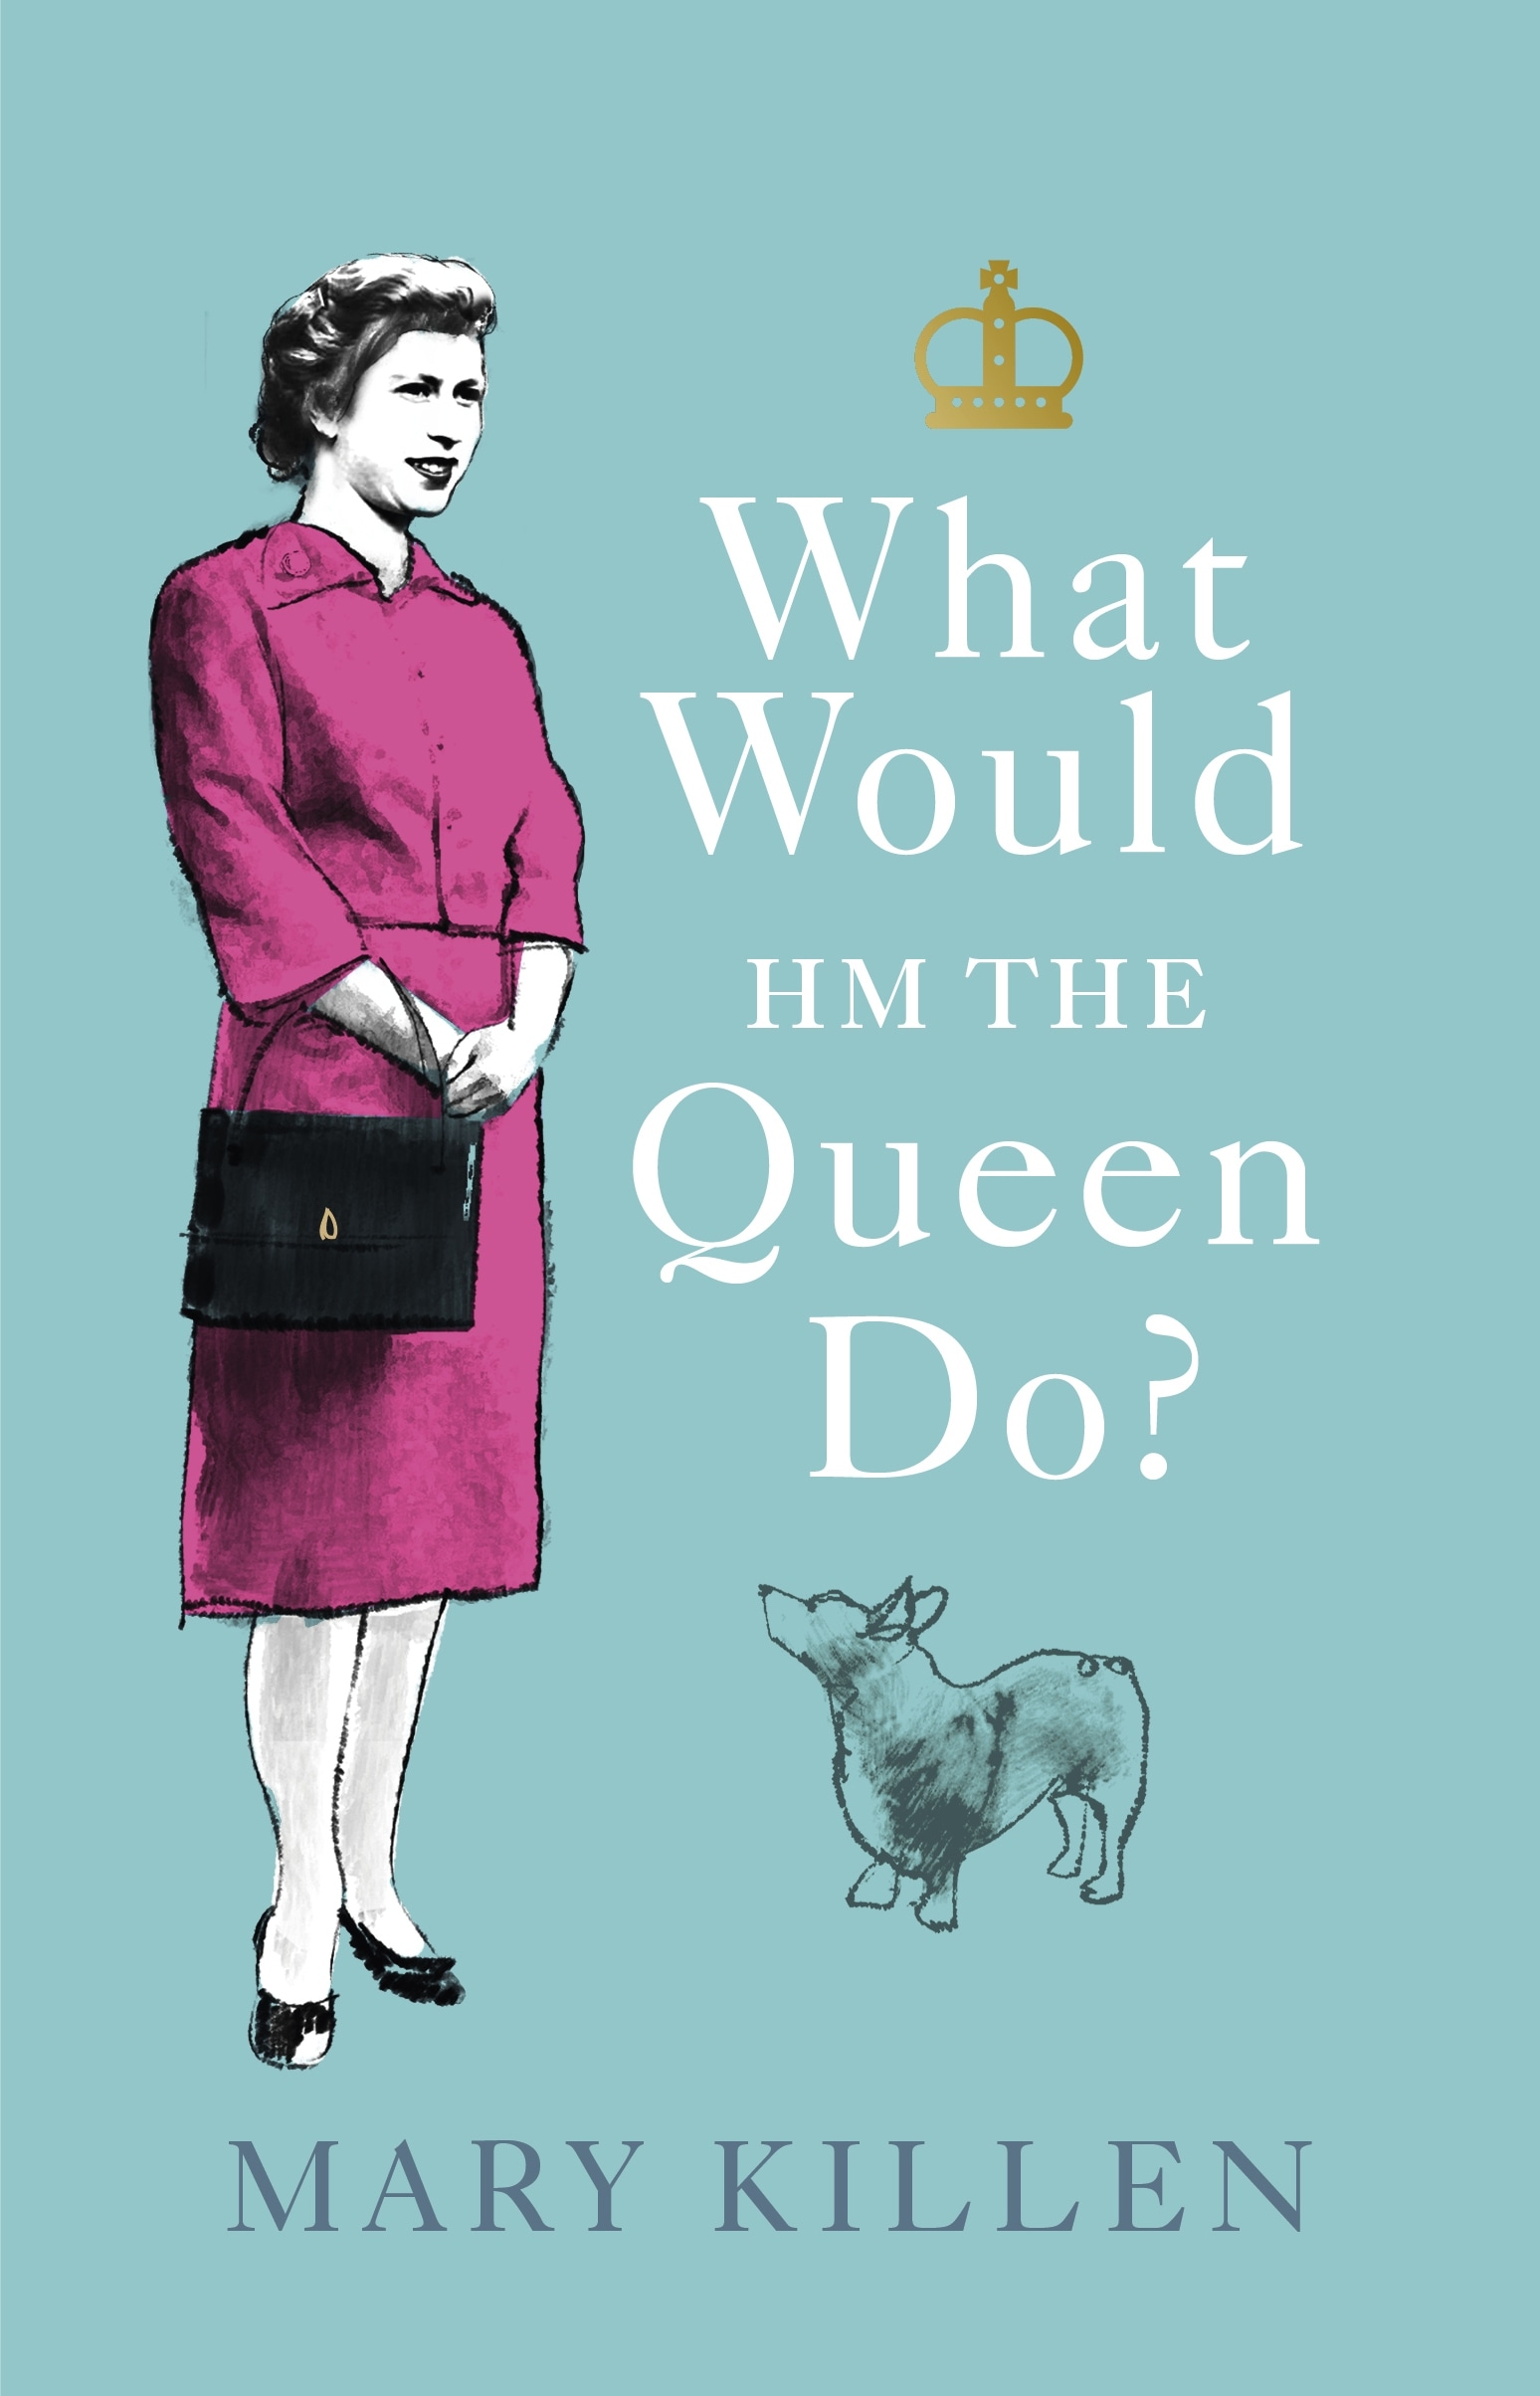 Book “What Would HM The Queen Do?” by Mary Killen — October 15, 2020